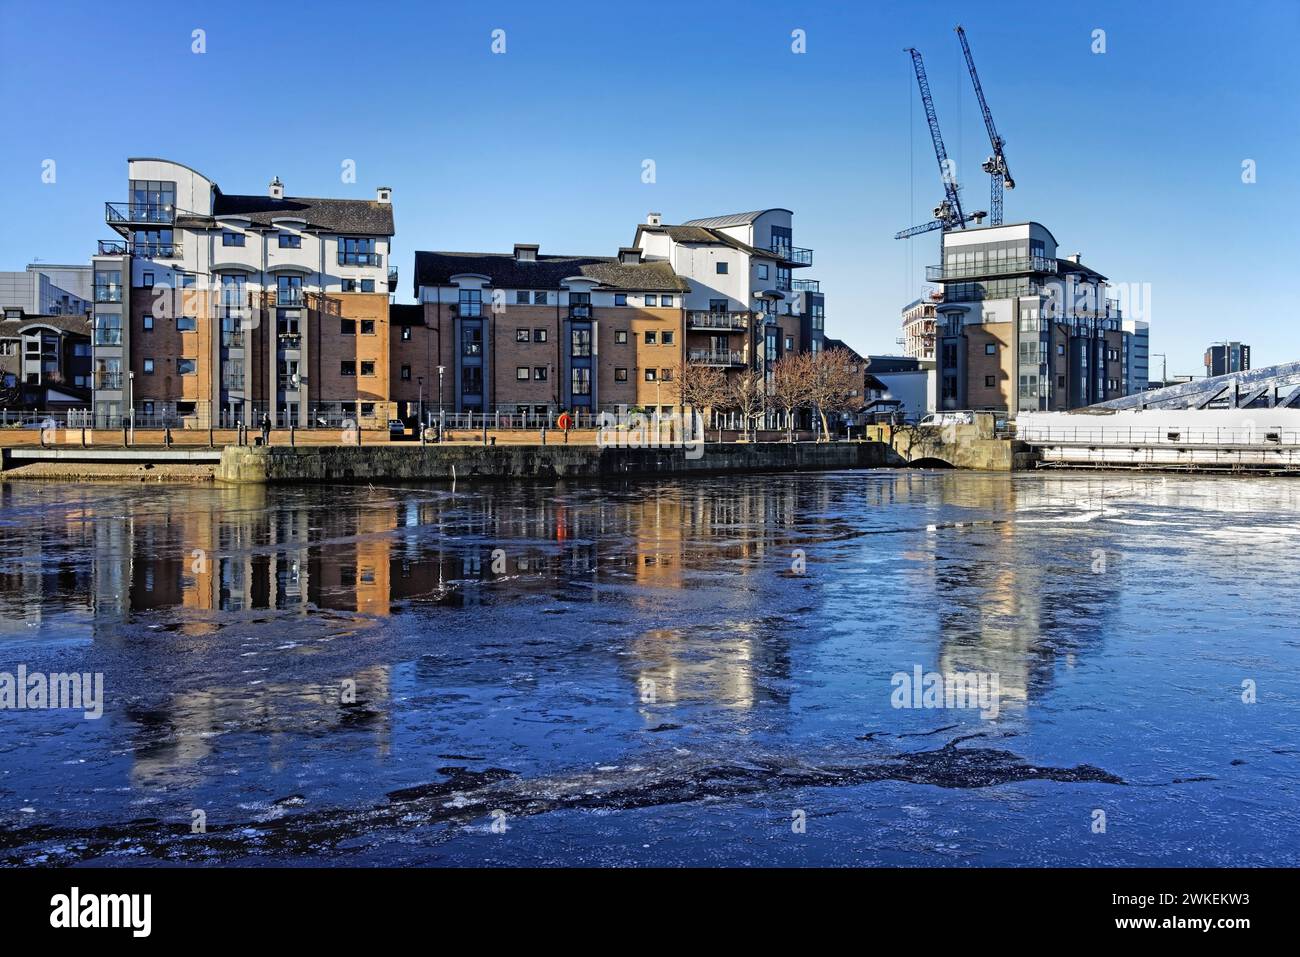 UK, Scotland, Edinburgh, Leith, The Shore, Water of Leith and Port of Leith Docks. Stock Photo